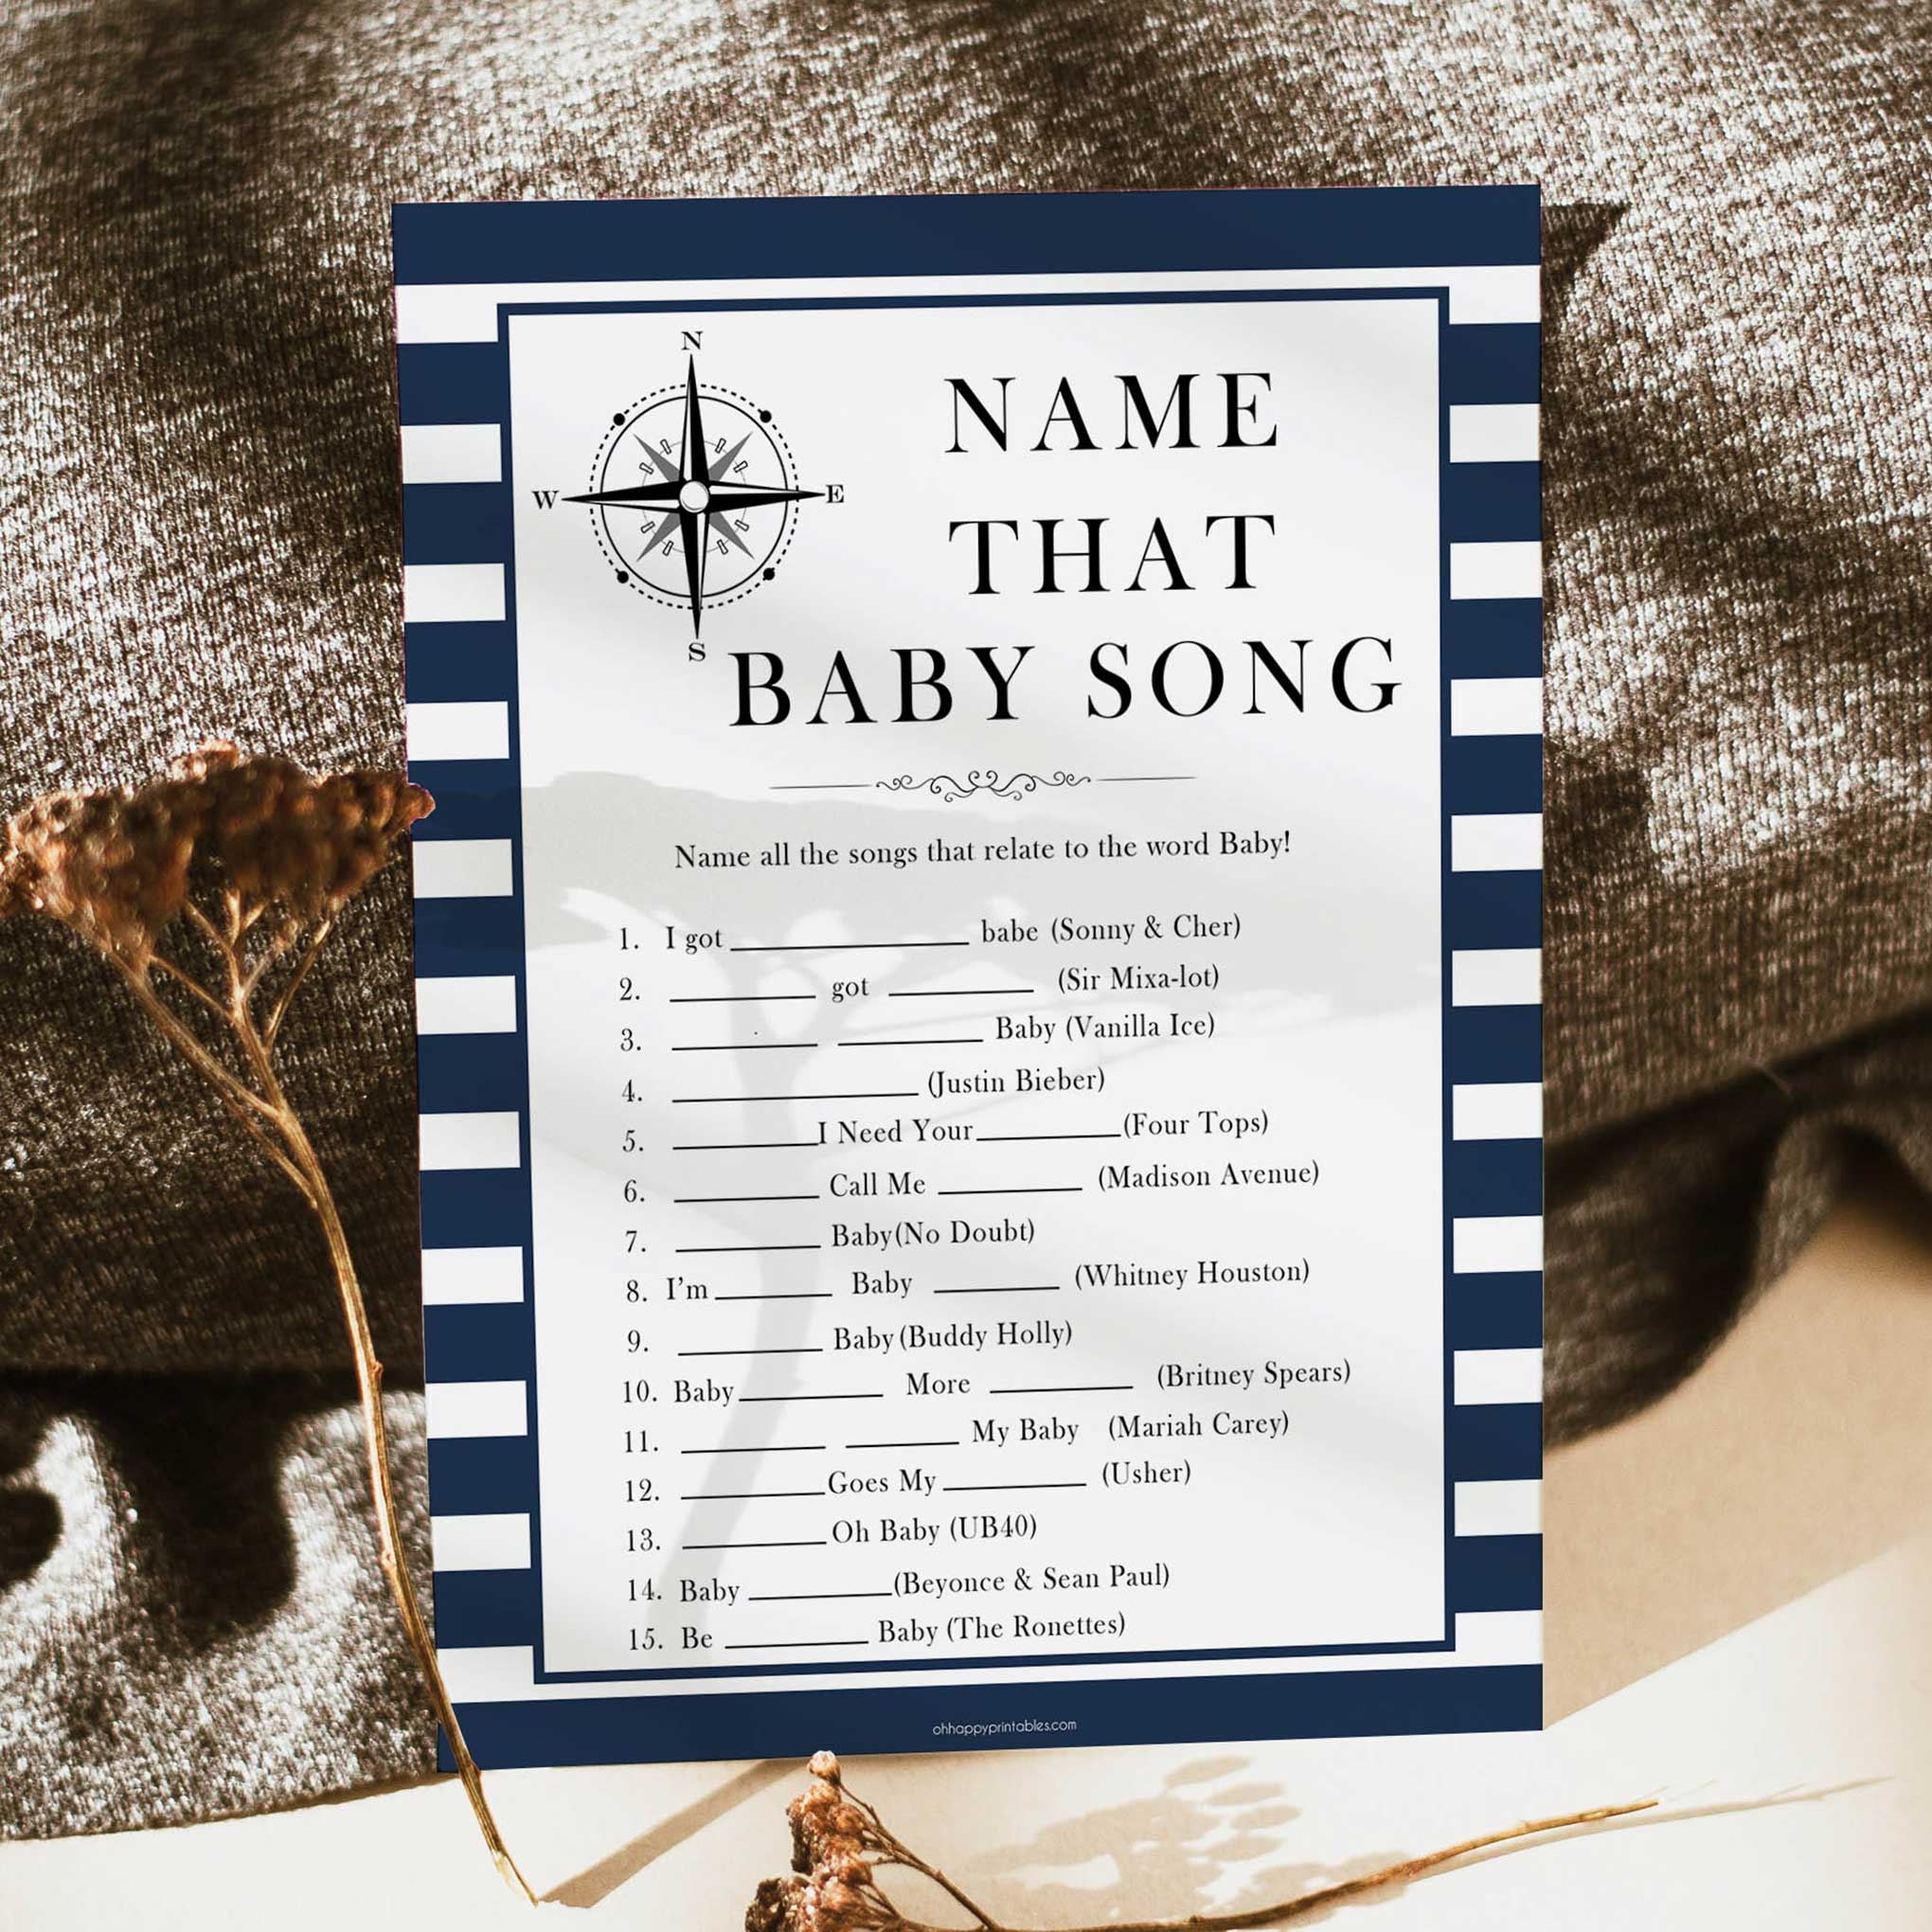 Nautical baby shower games, name that baby song baby shower games, printable baby shower games, baby shower games, fun baby games, ahoy its a boy, popular baby shower games, sailor baby games, boat baby games